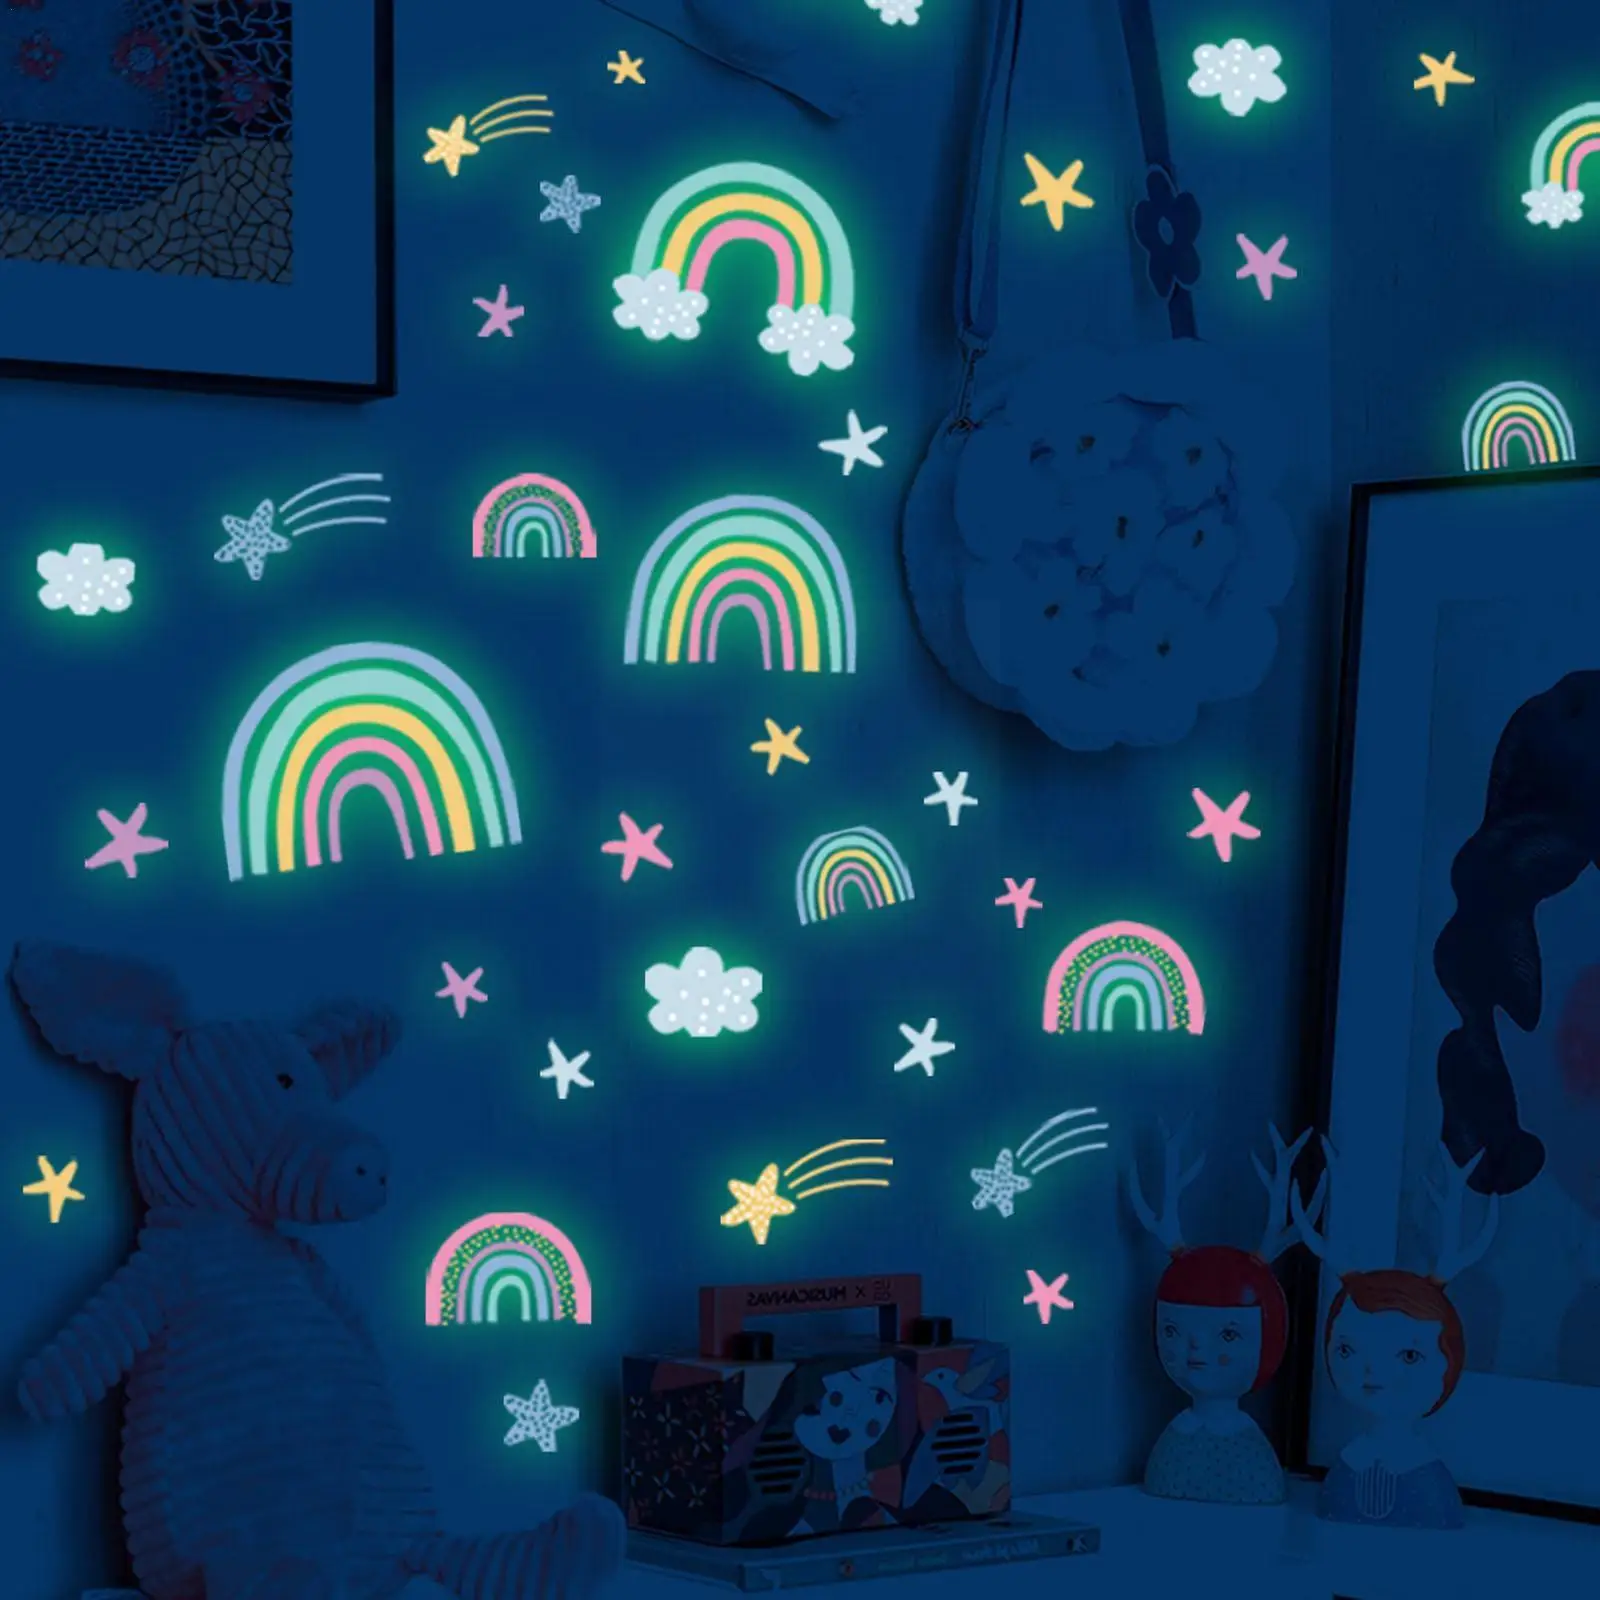 

Rainbow Clouds Stars Fluorescent Wall Stickers Bedroom Room Children's Wall Self-adhesive Living Stickers Room Decoration O8l8